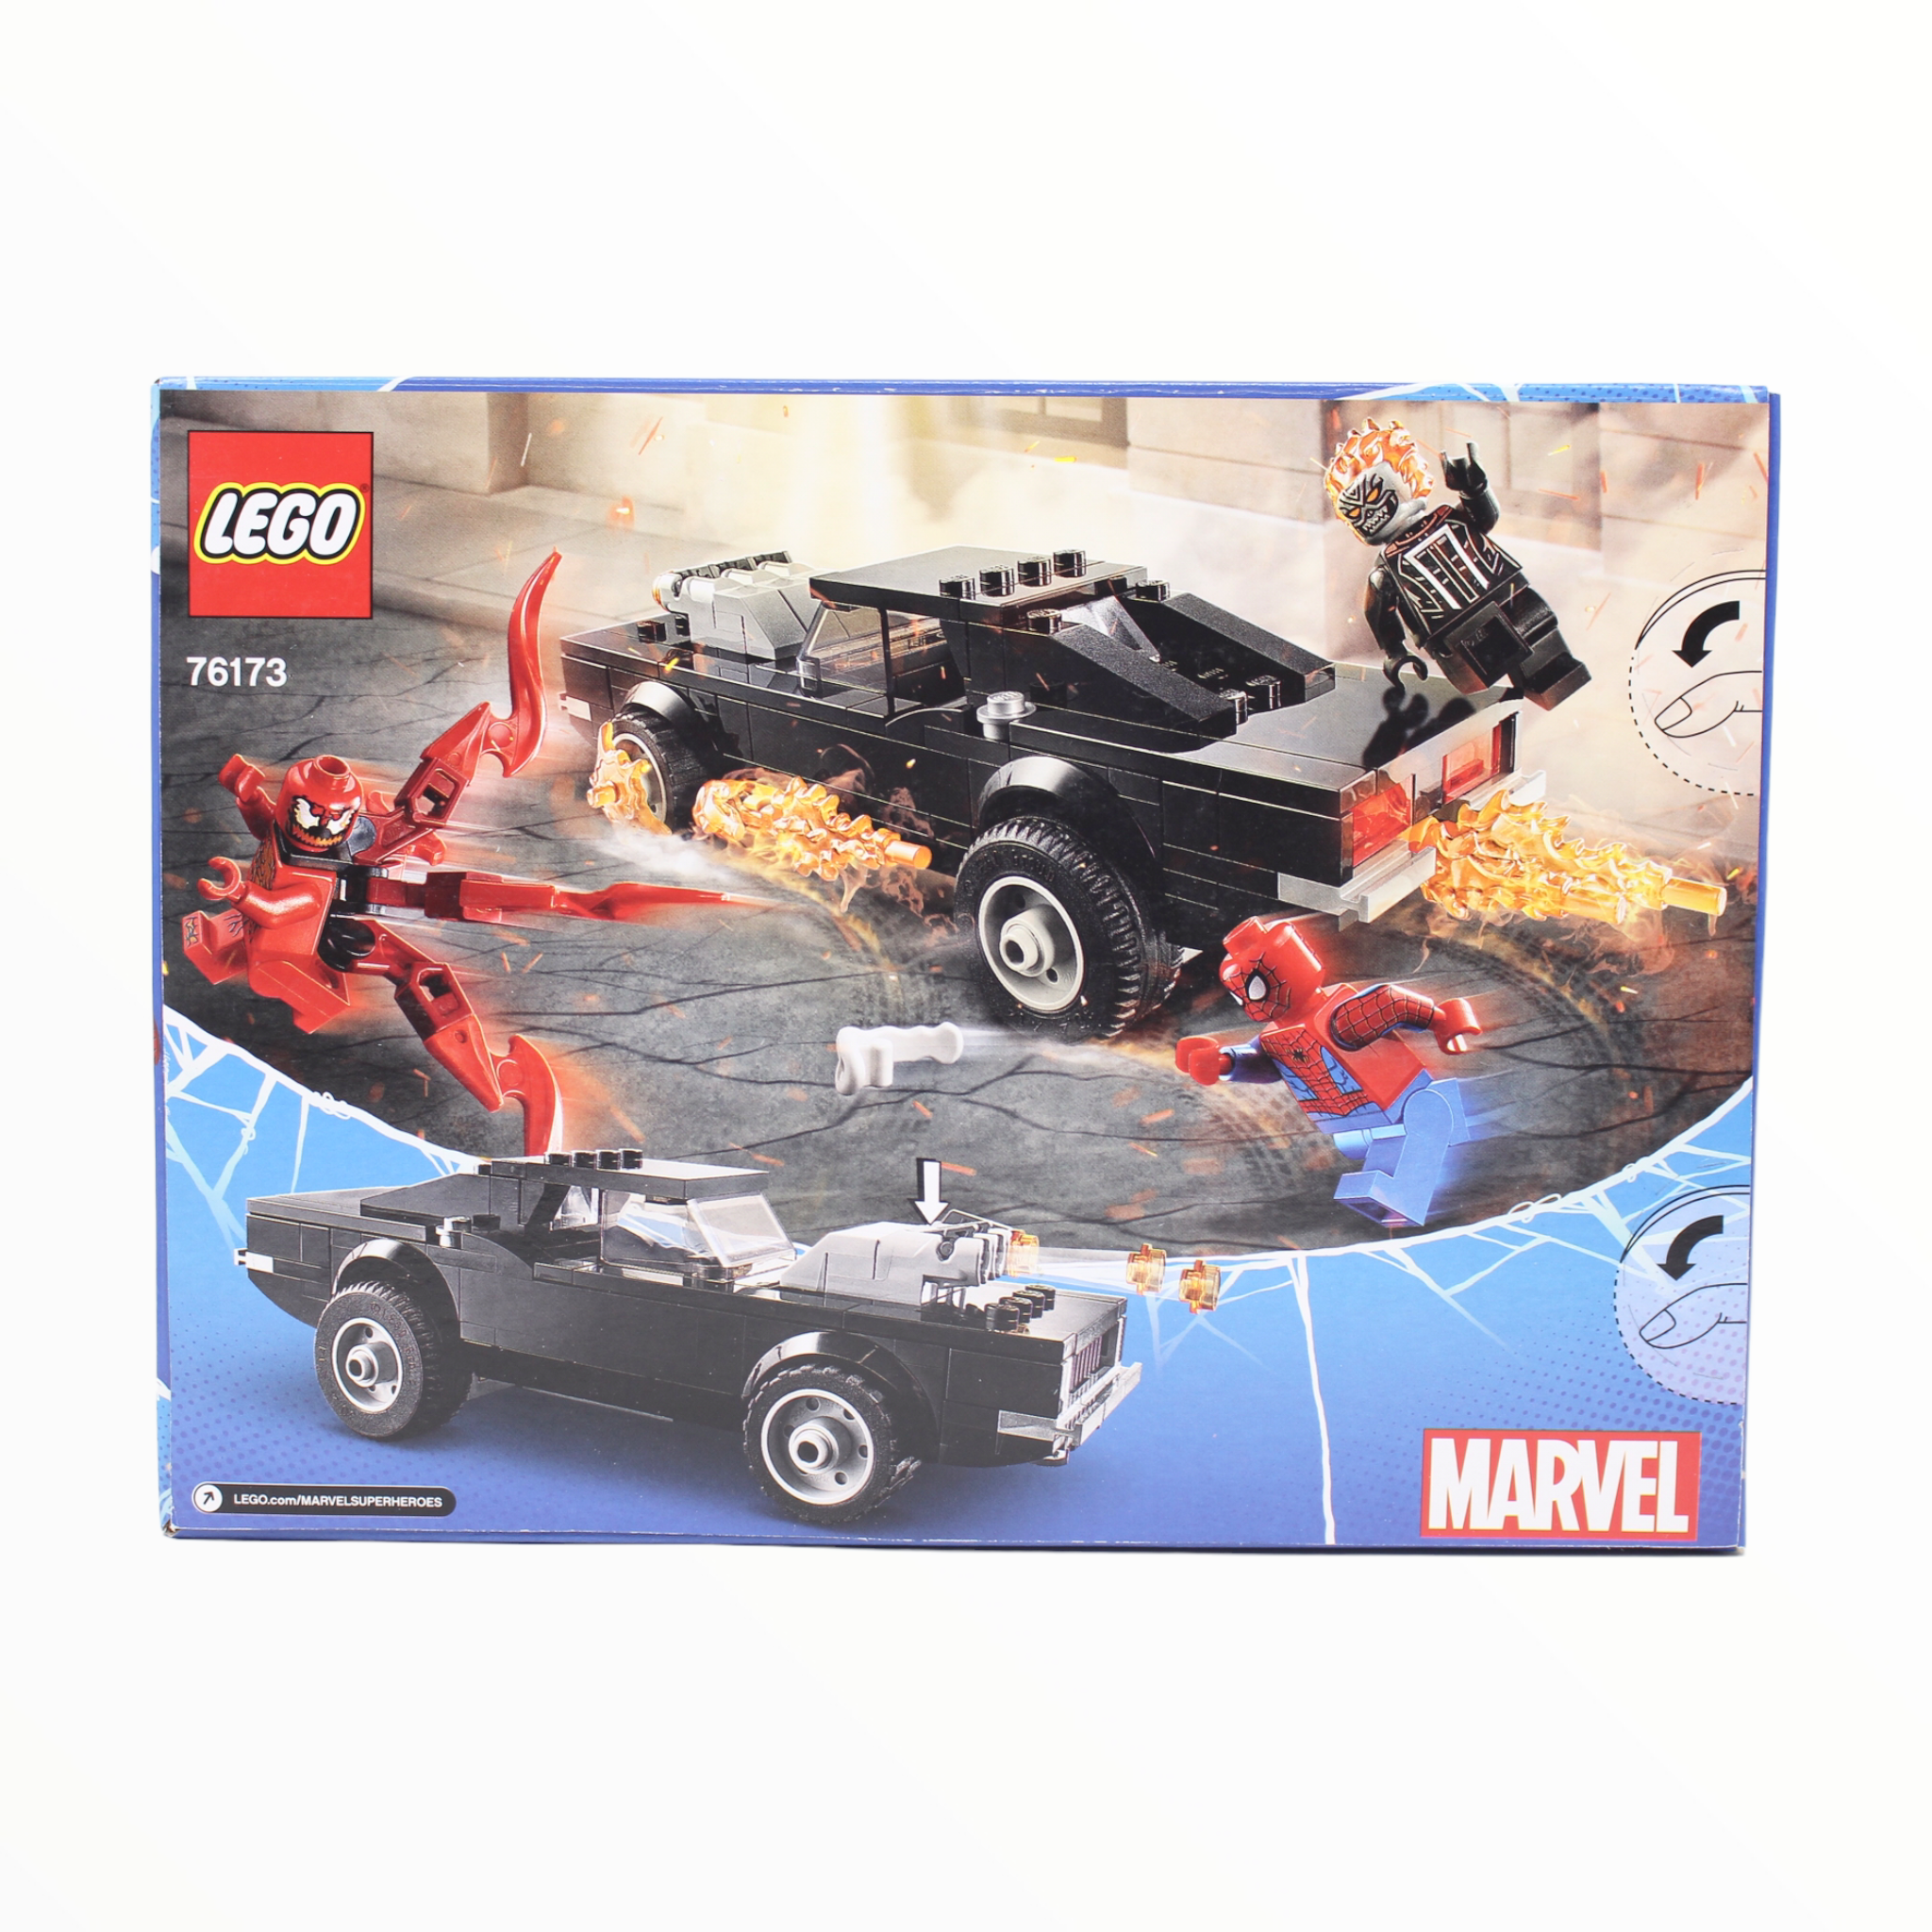 Retired Set 76173 Marvel Spider-Man and Ghost Rider vs. Carnage